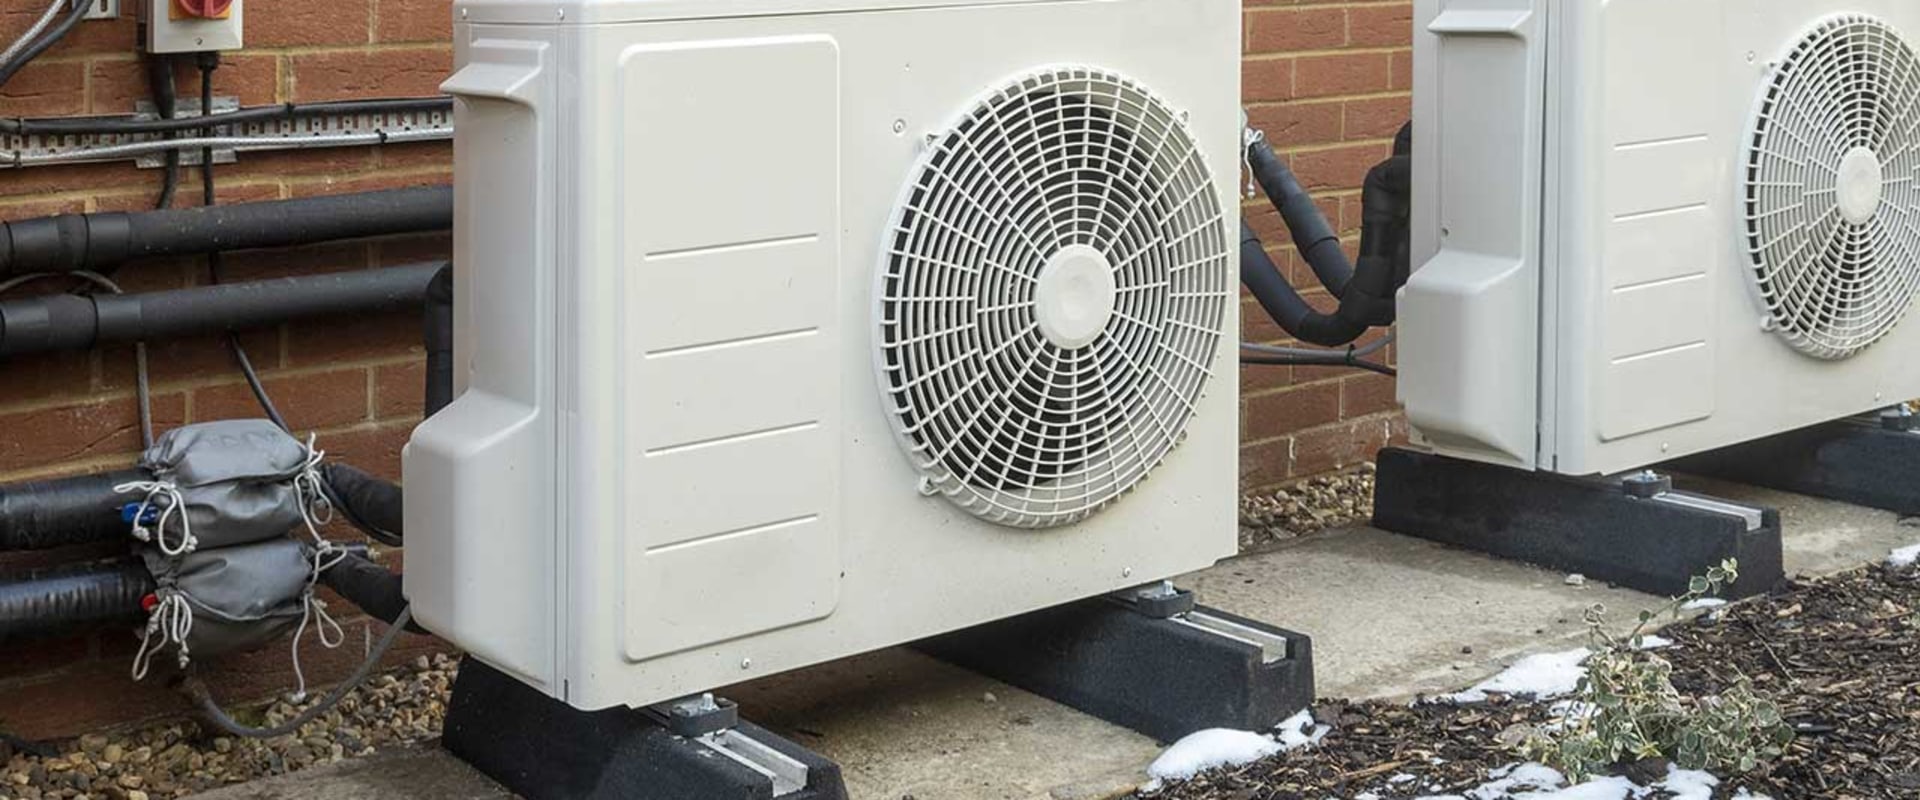 Choosing the Best Heating Option for HVAC Replacement in Delray Beach, FL